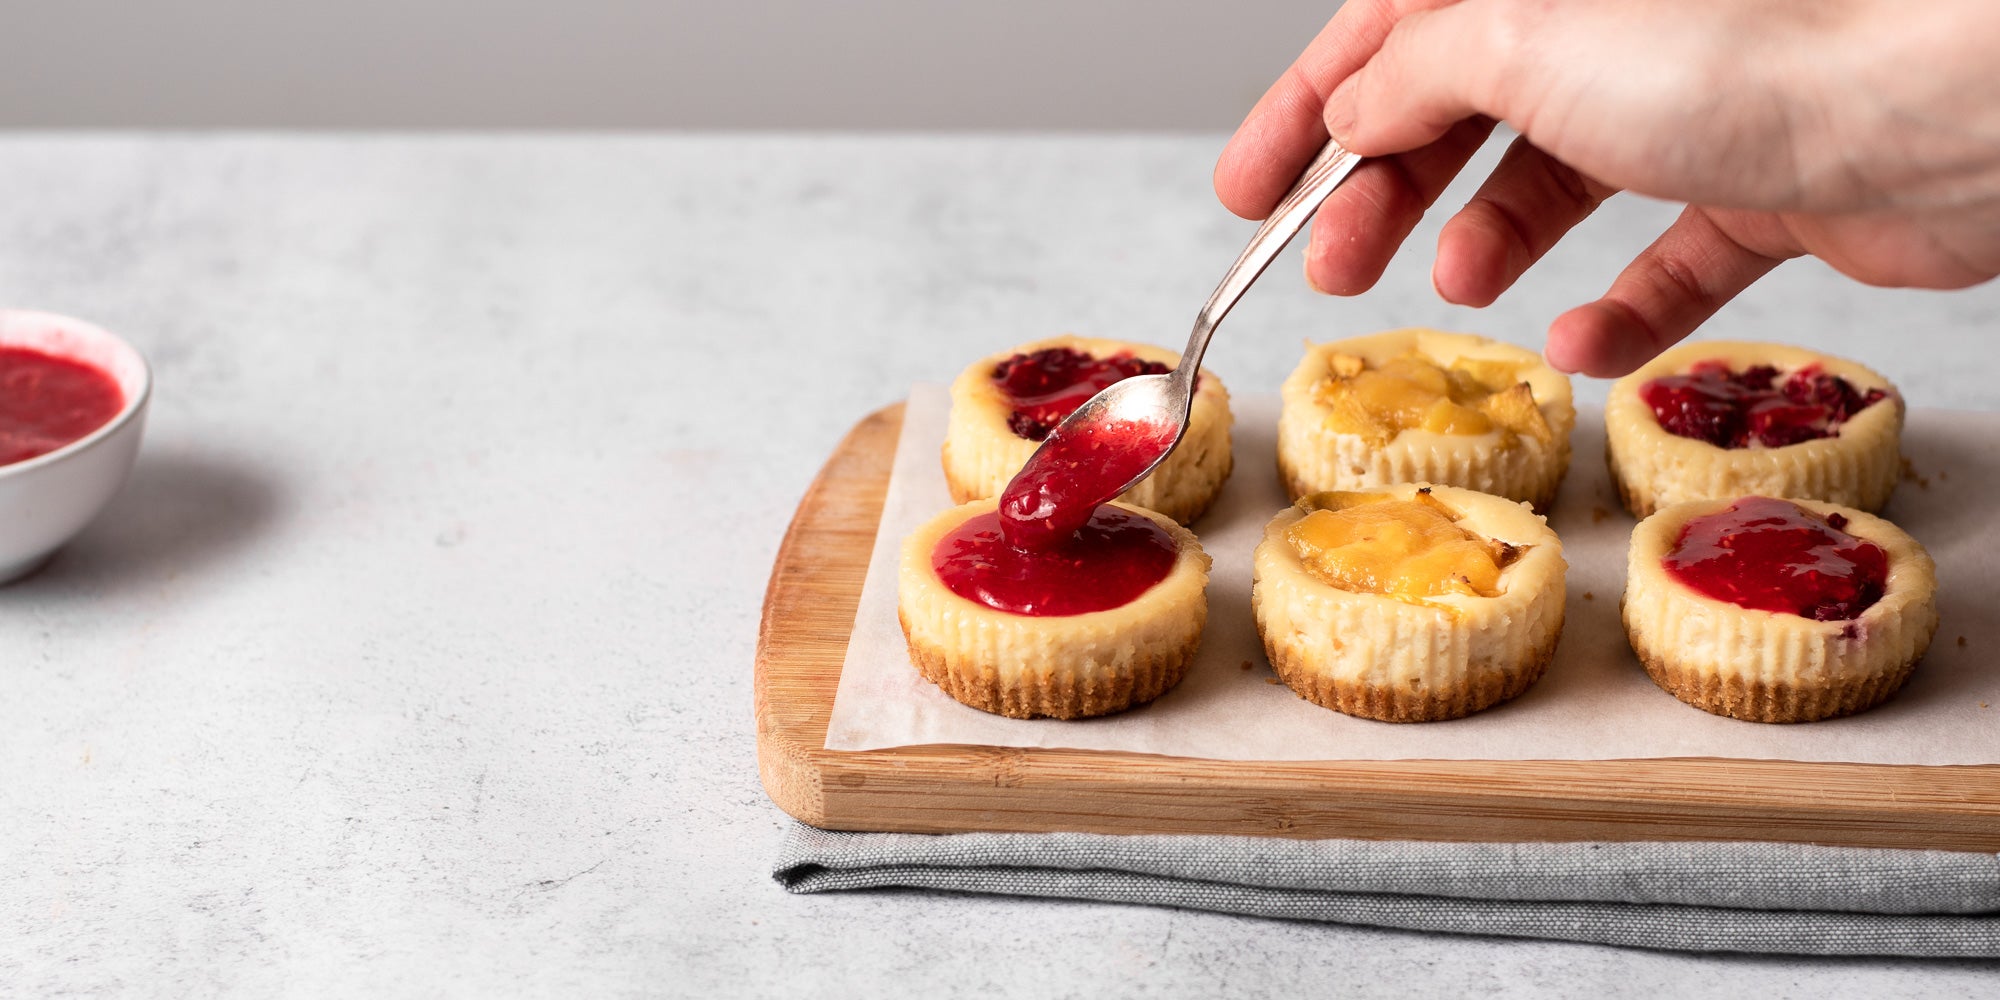 person putting raspberries on mini cheesecakes with a spoon